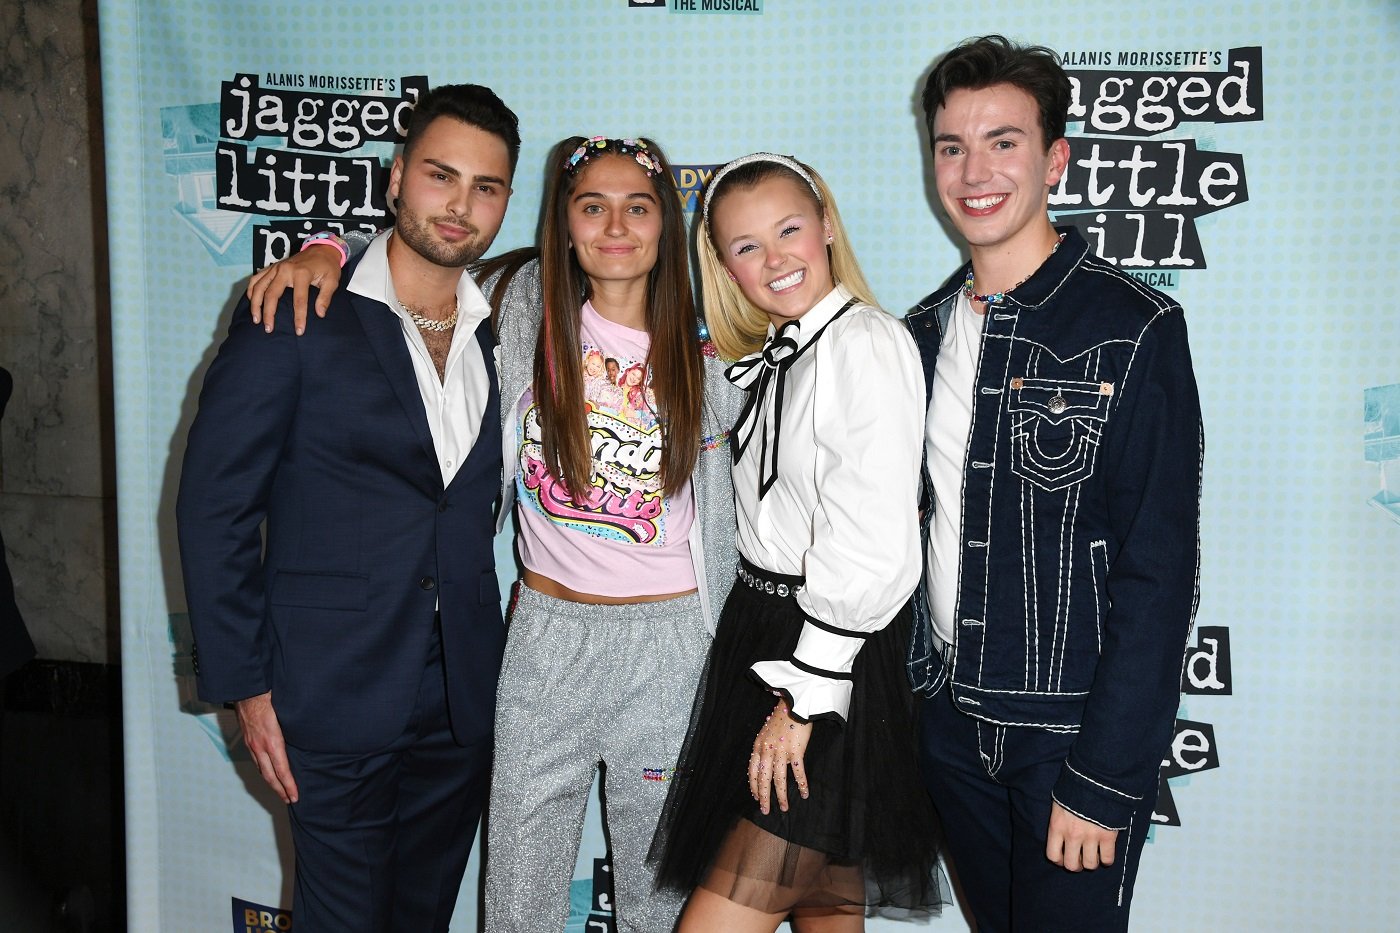 Christian Thomas, Avery Cyrus, JoJo Siwa and Chase Thomas attend the Los Angeles Premiere of "Jagged Little Pill" at Hollywood Pantages Theatre on September 14, 2022